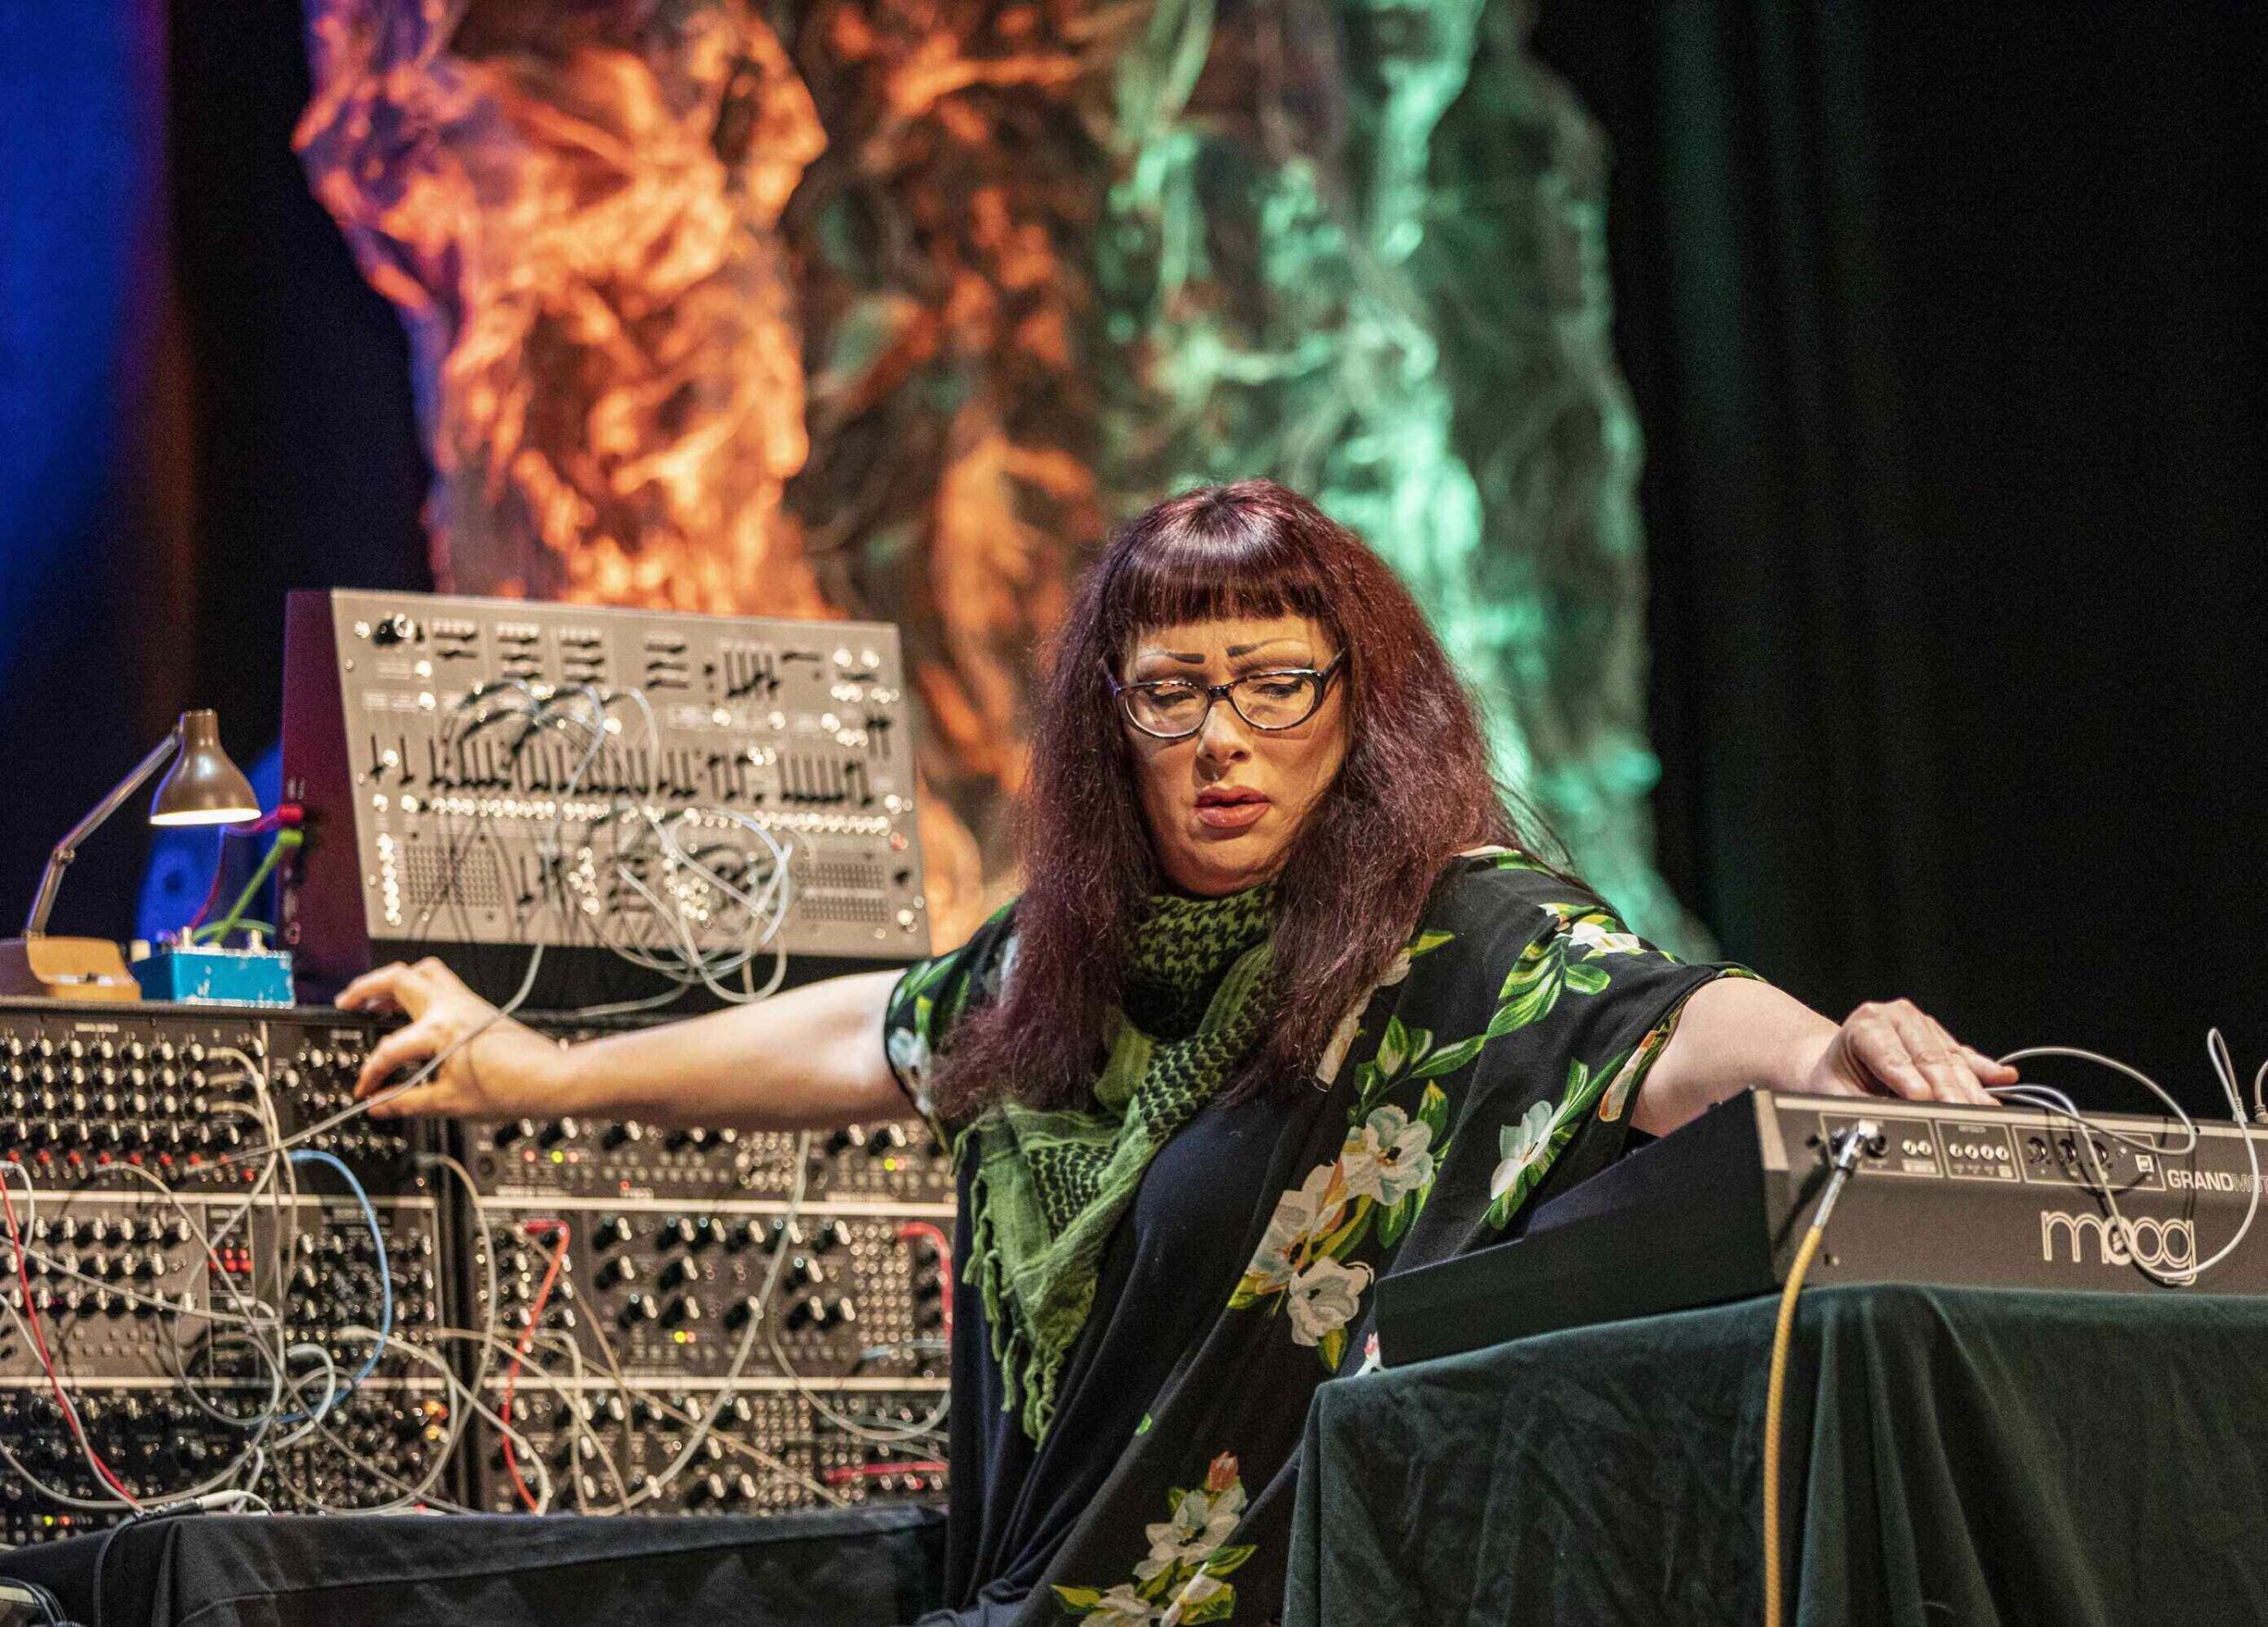 Lisa Bella Donna composed on Moog synthesizers